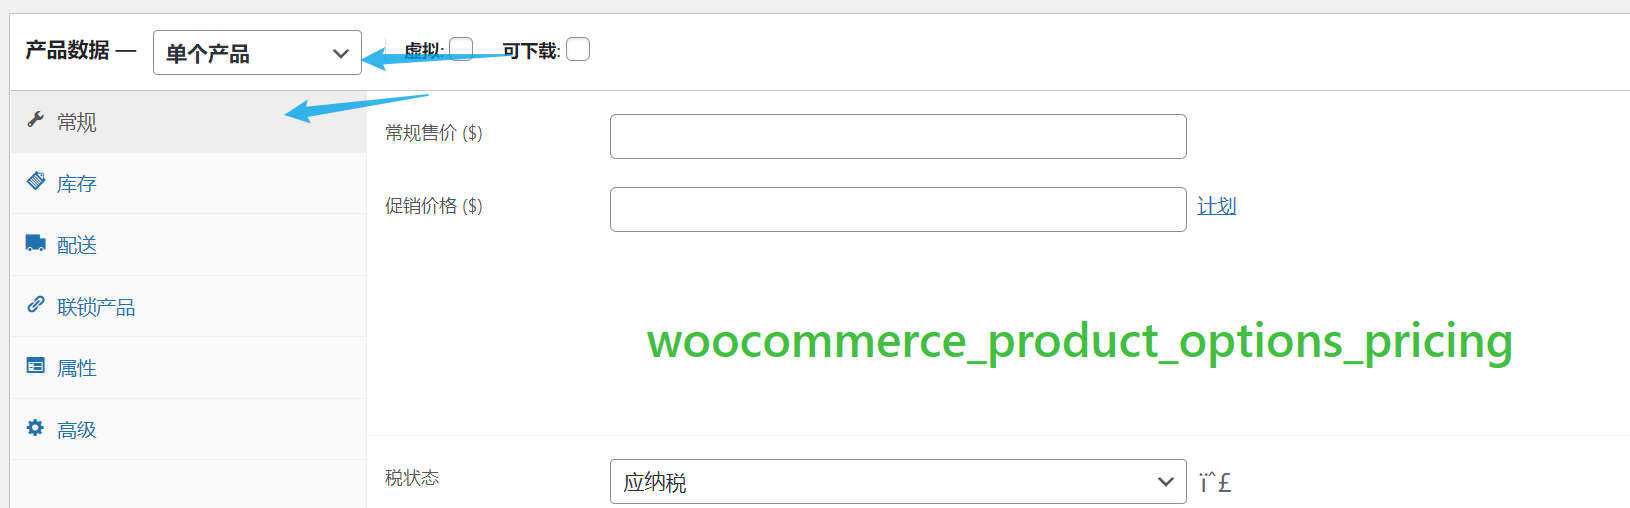 oocommerce_product_options_pricing